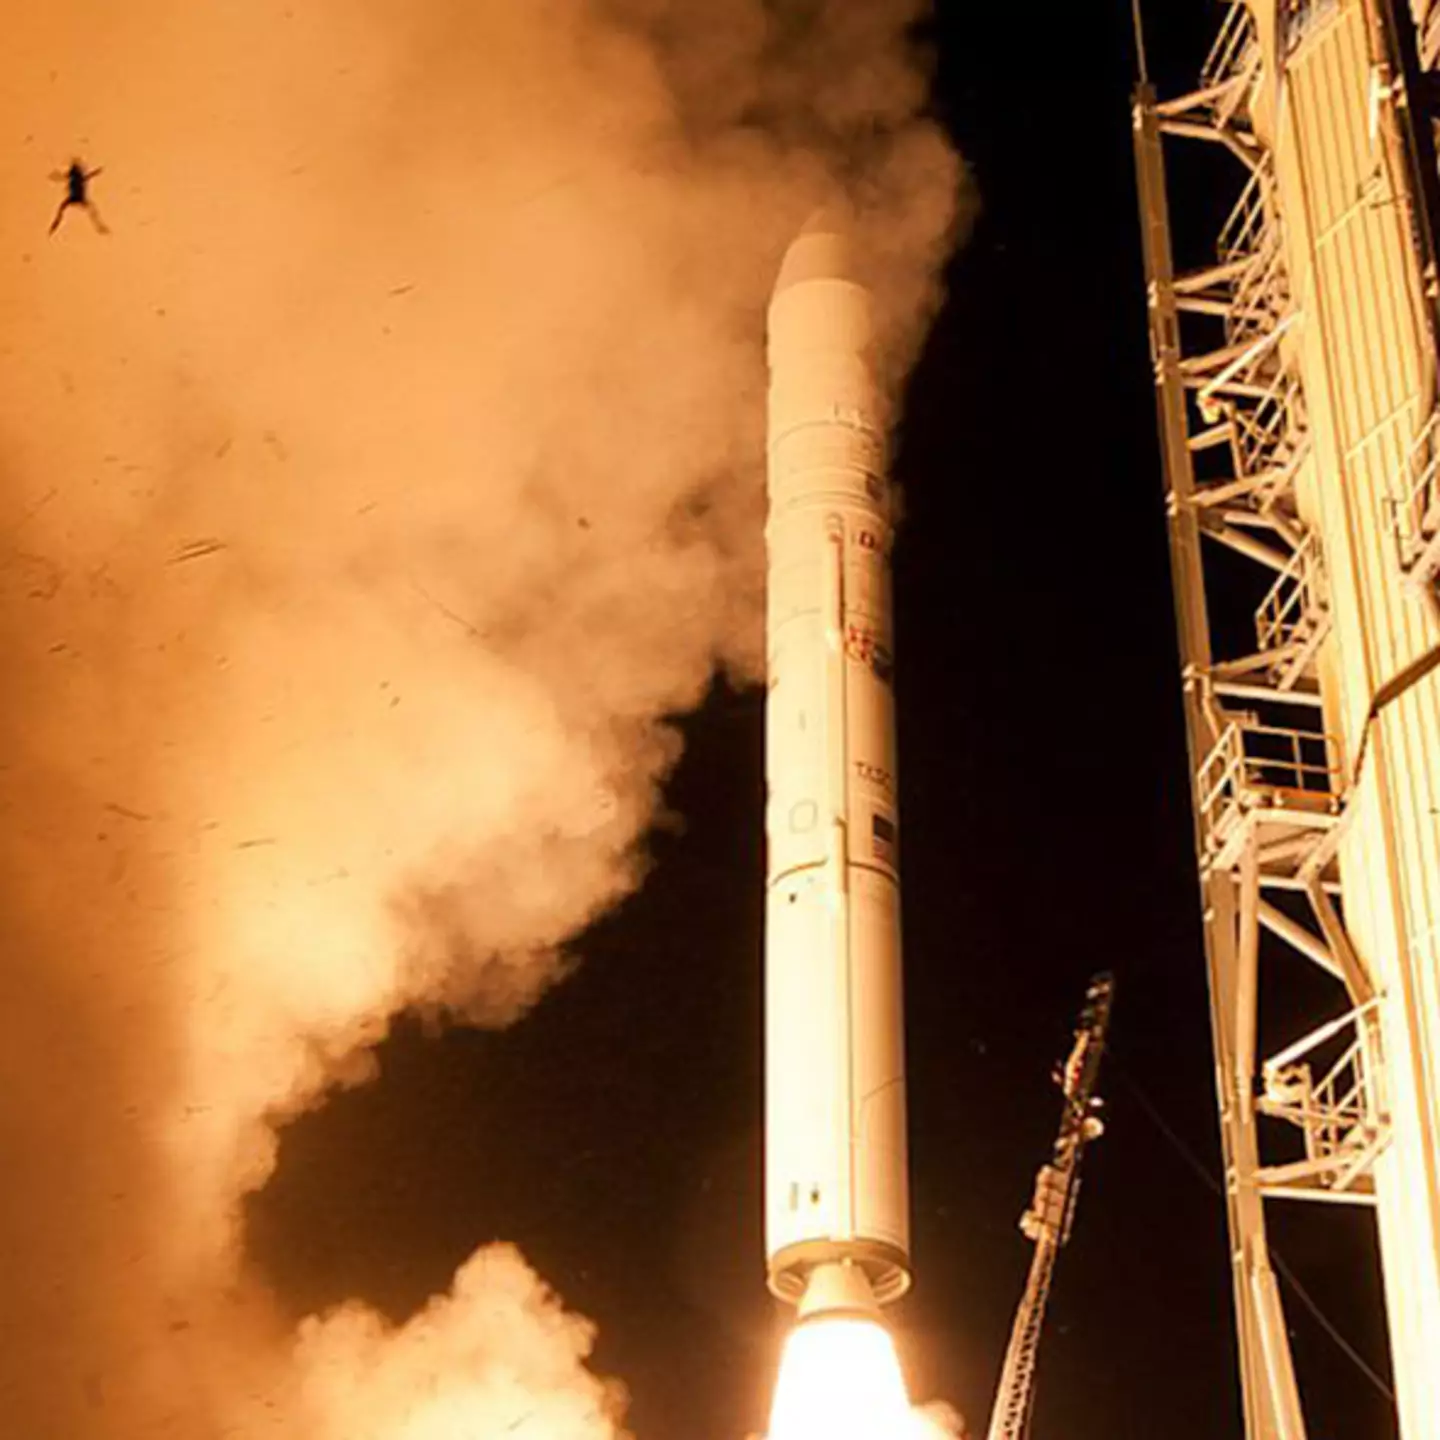 People mind-blown after spotting unlikely photo-bomber in images of NASA rocket launch